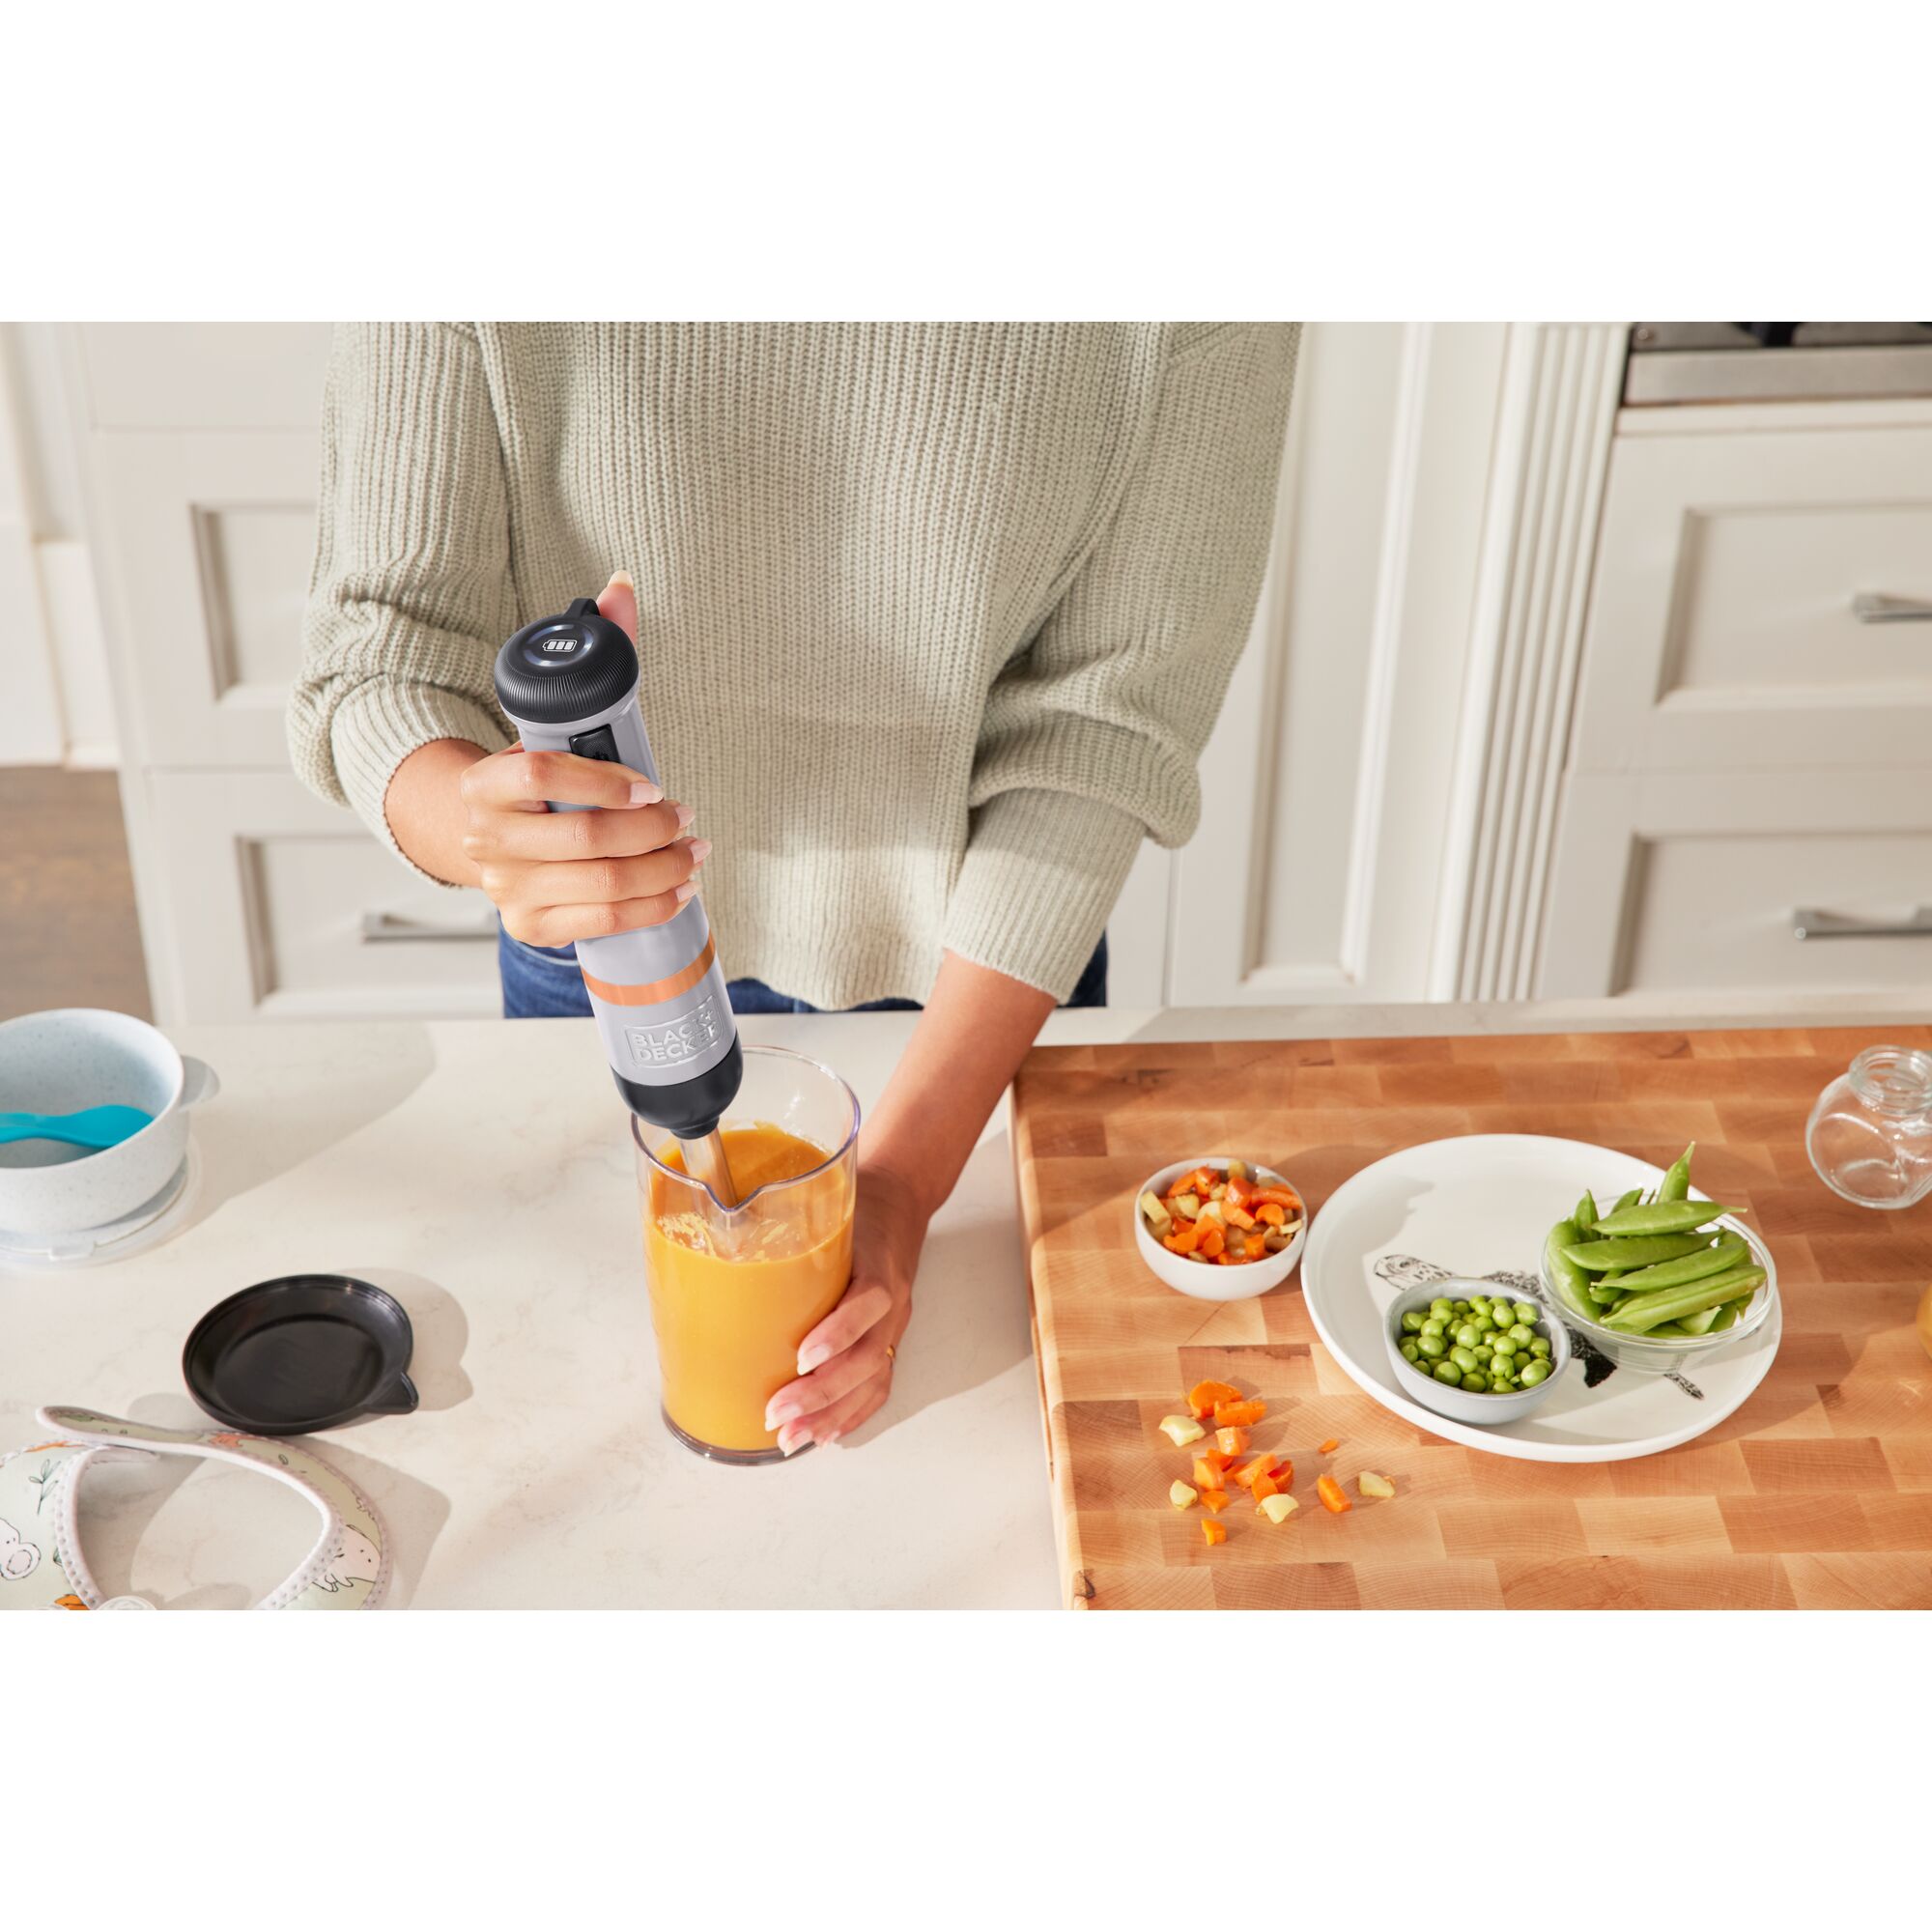 Talent using the grey, BLACK+DECKER kitchen wand immersion blender to prepare baby food